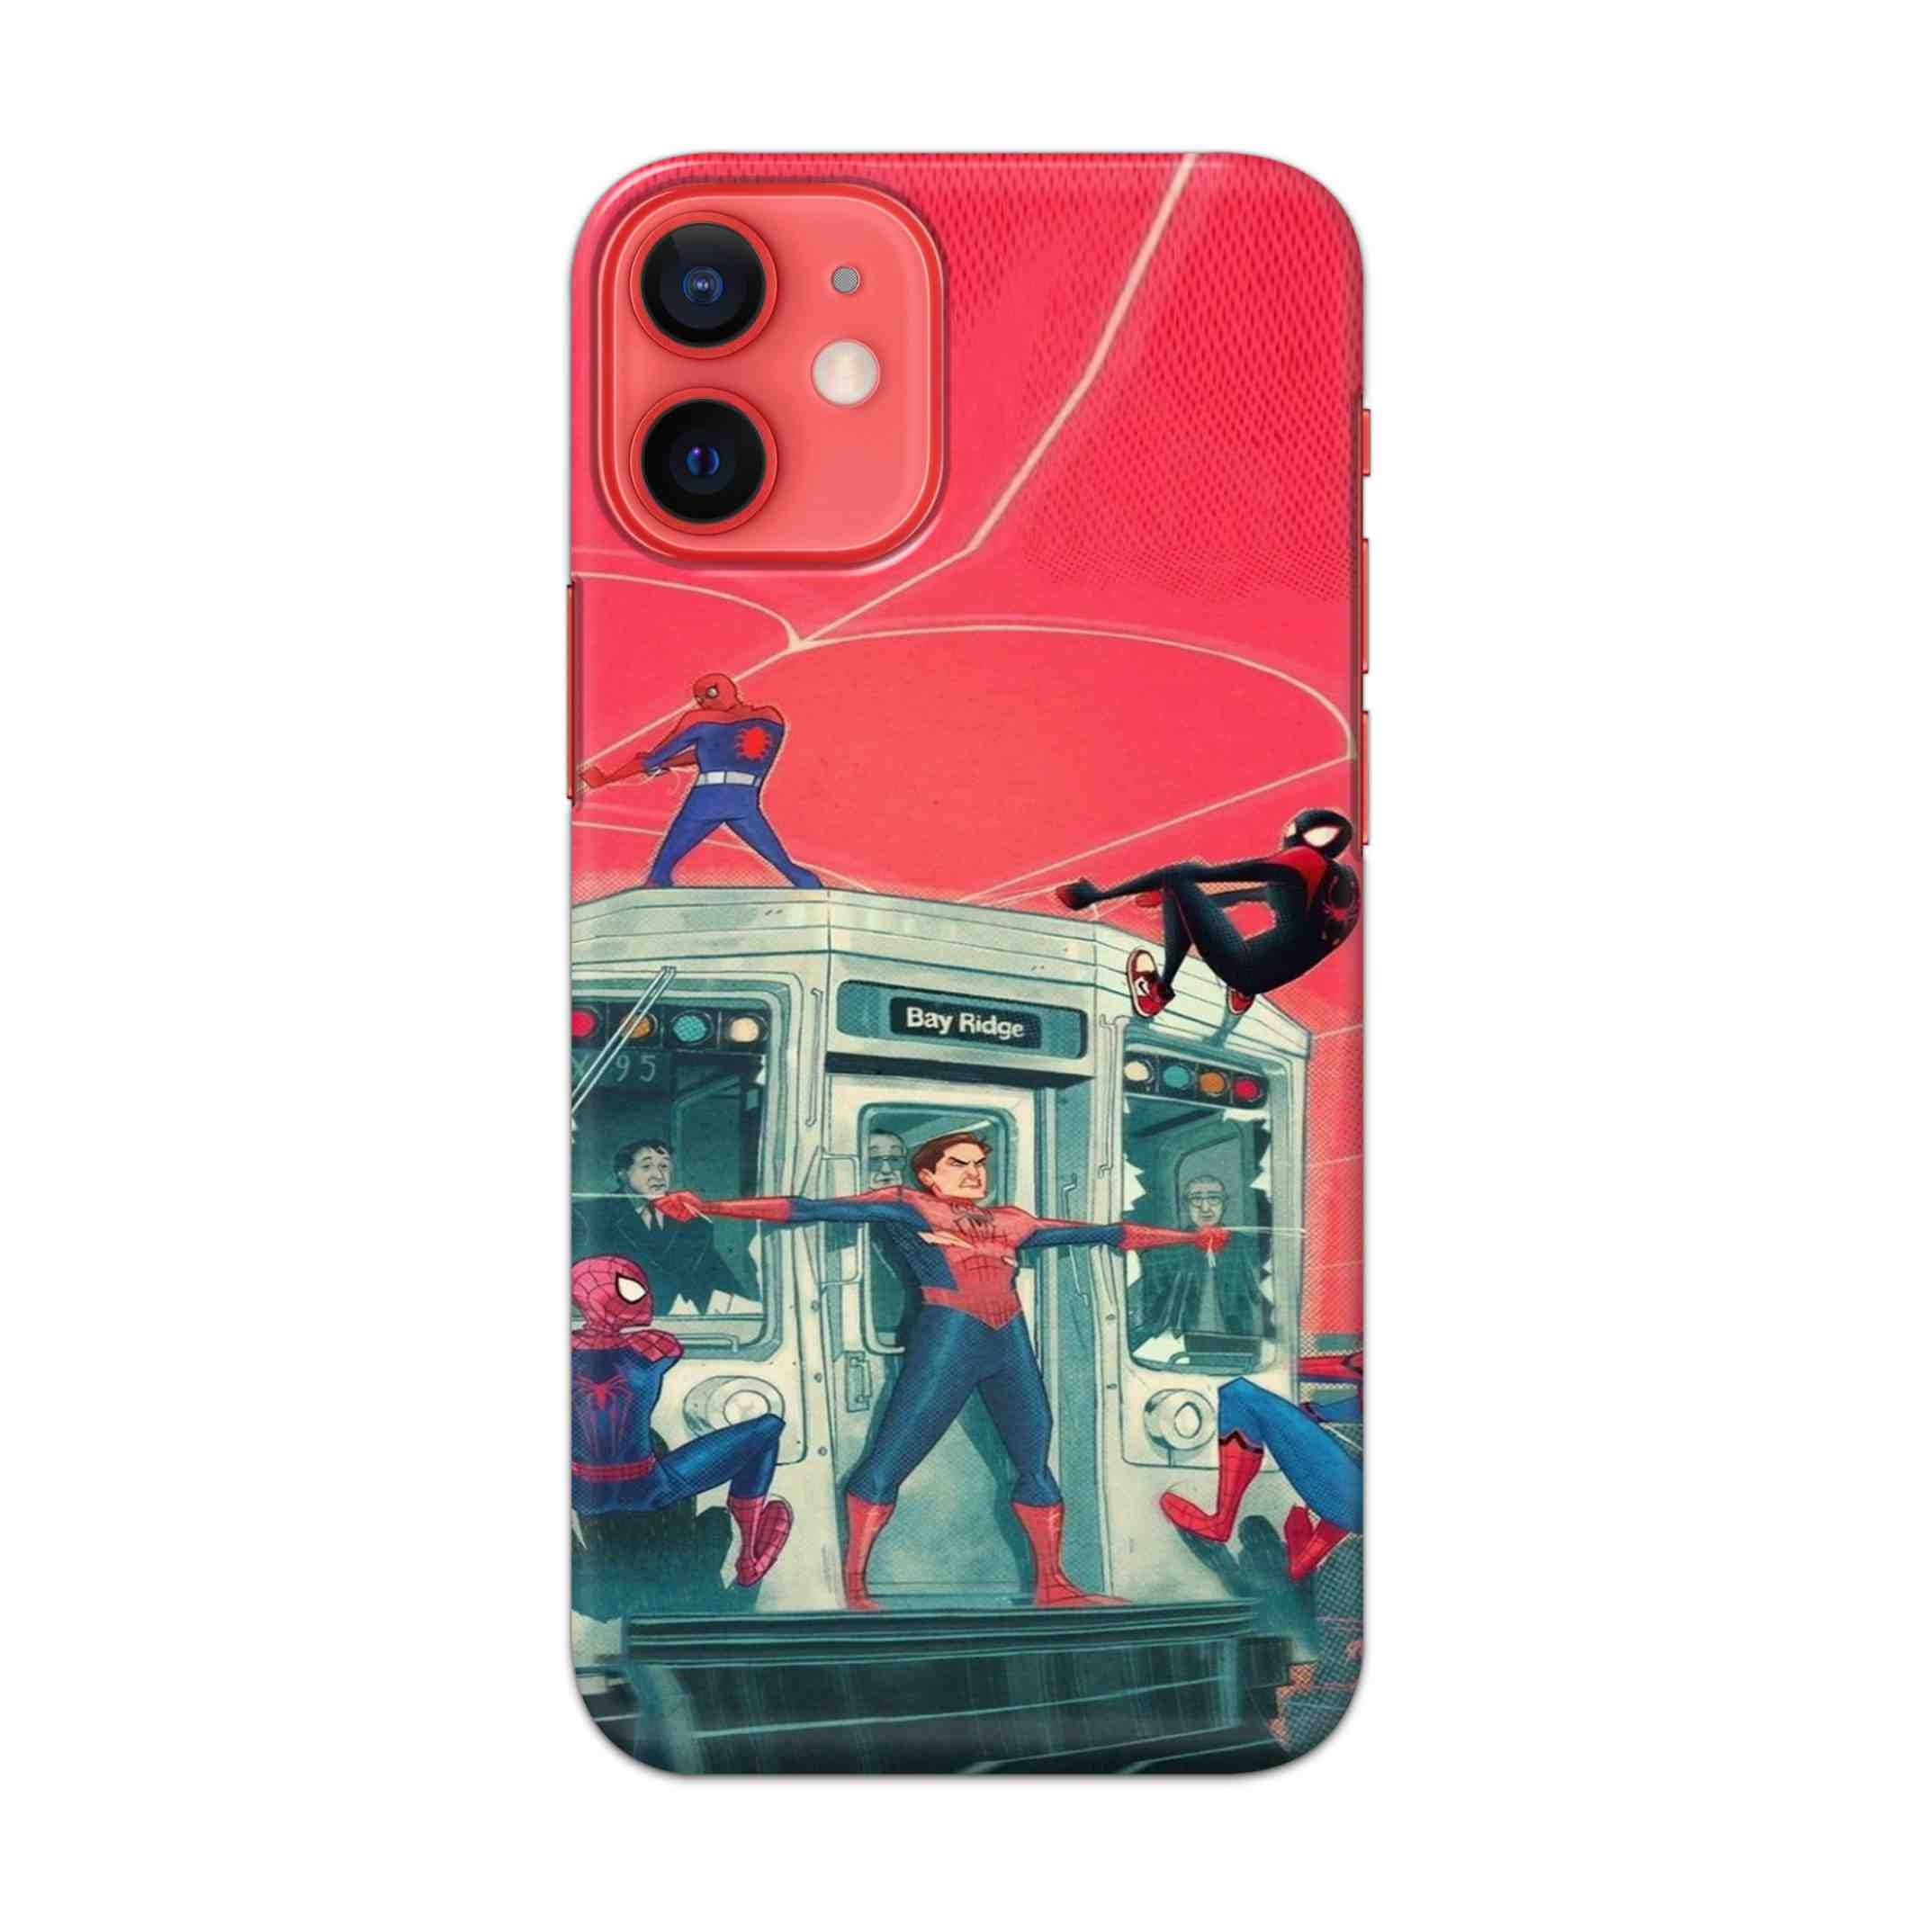 Buy All Spiderman Hard Back Mobile Phone Case/Cover For Apple iPhone 12 mini Online